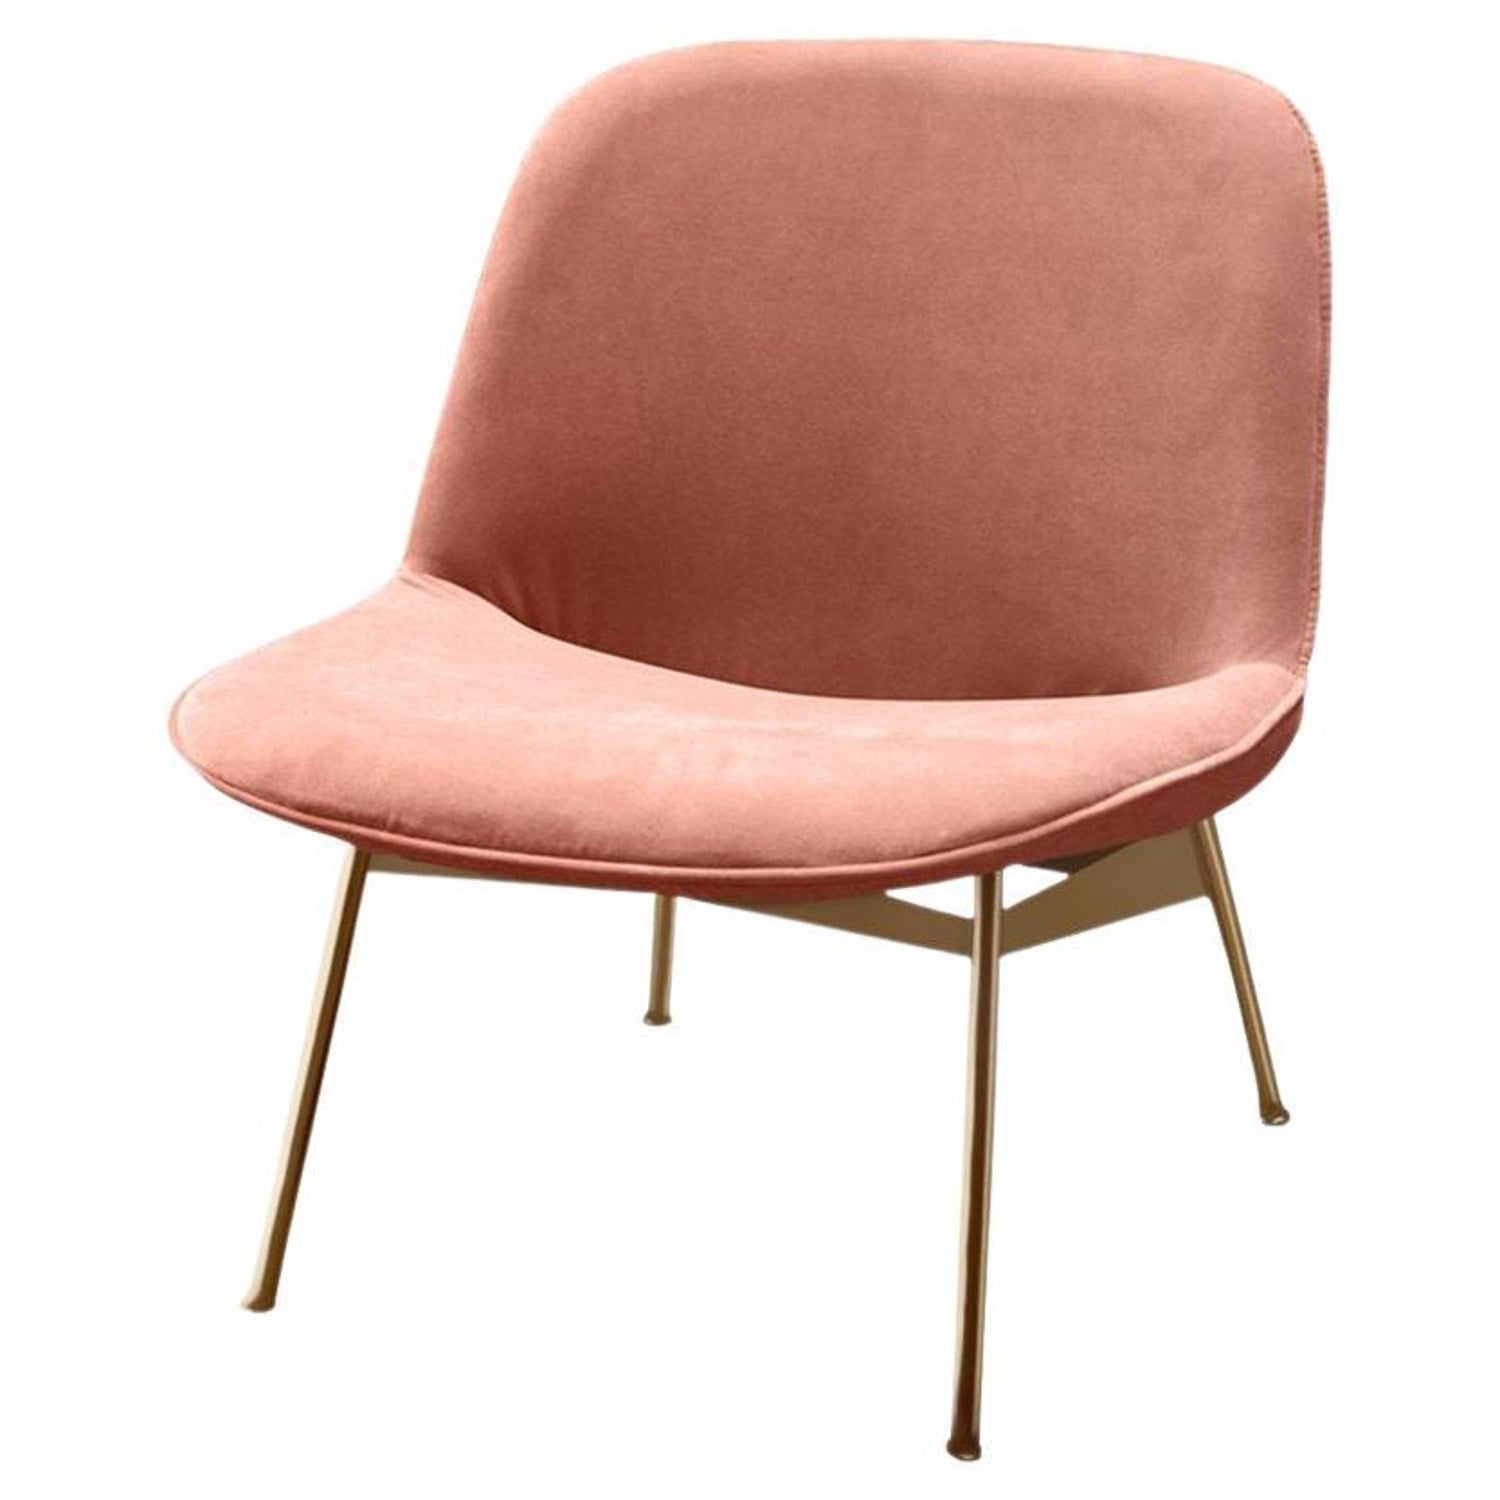 Donut Shaped Lounge Chair in Suede Italy, 1970s at 1stDibs